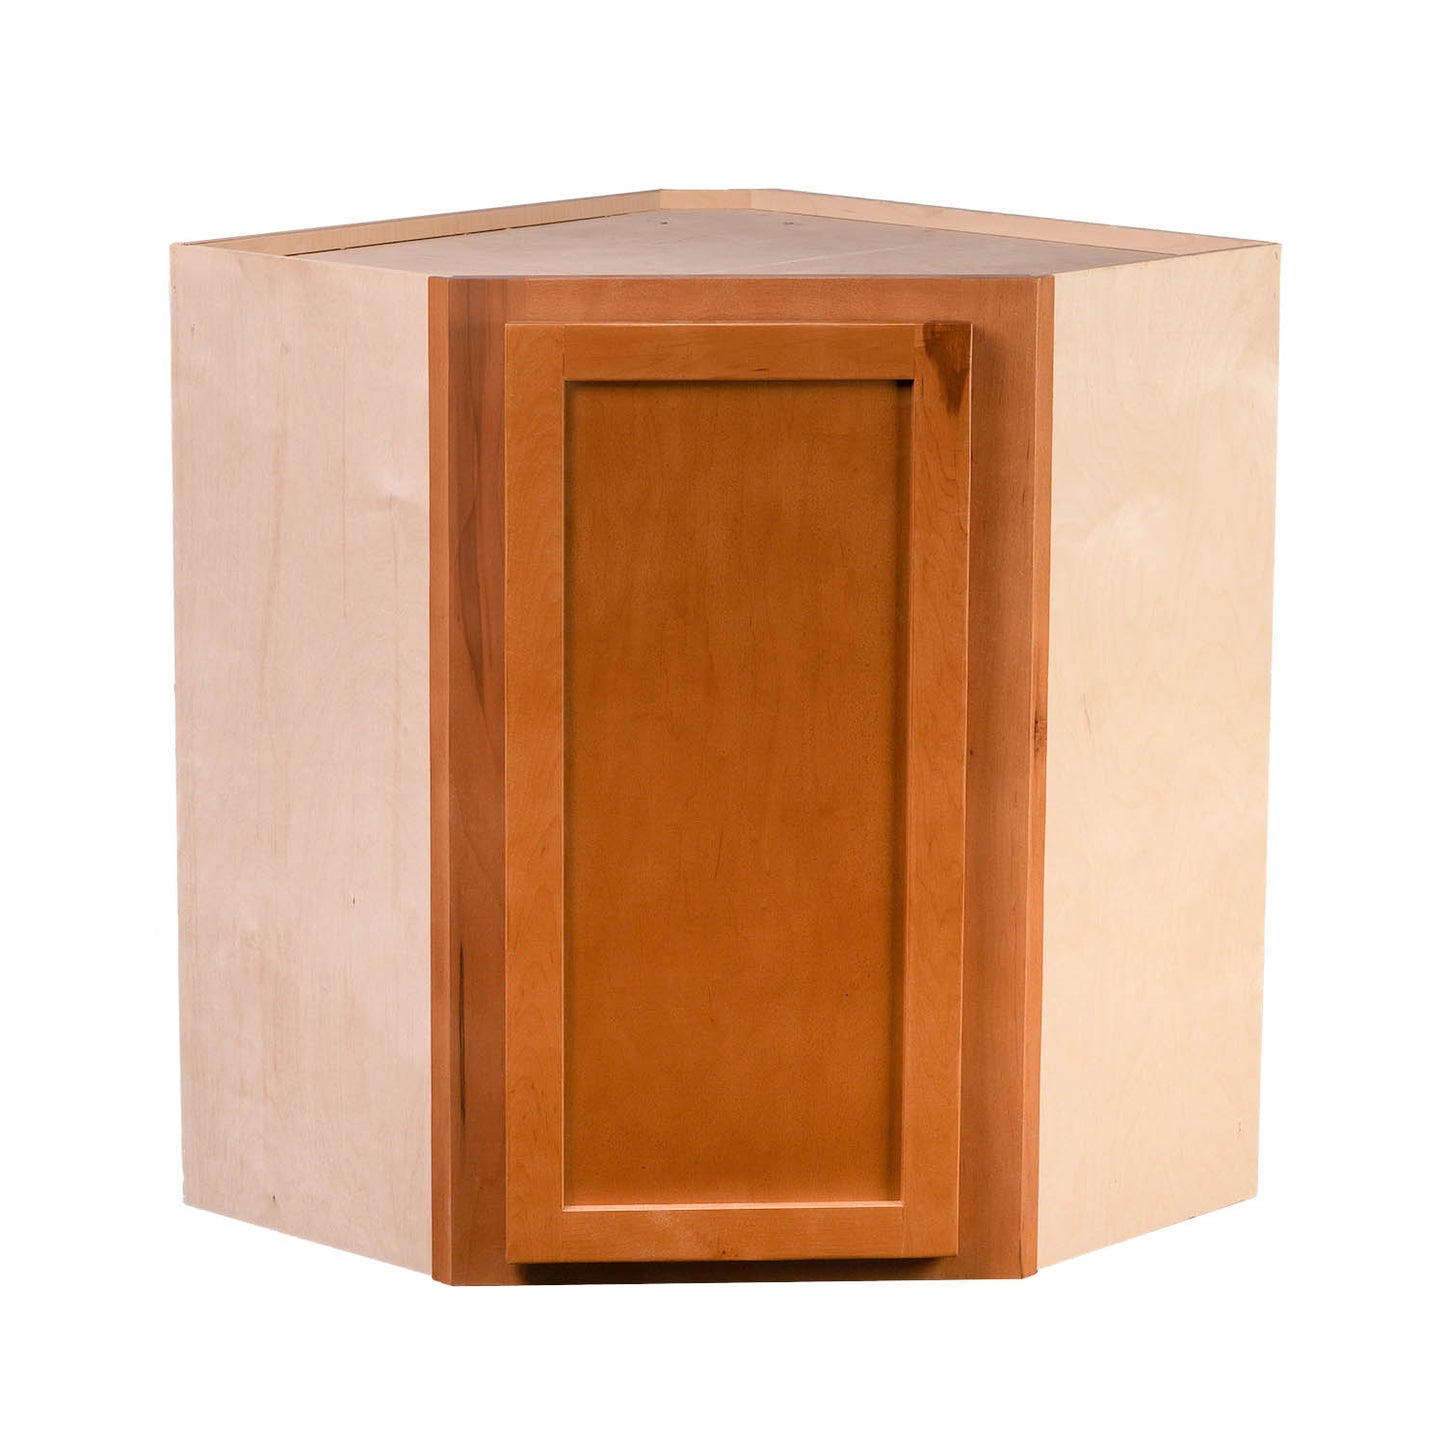 Quicklock RTA (Ready-to-Assemble) Provincial Stain 24"WX30"HX12"D Wall Corner Cabinet